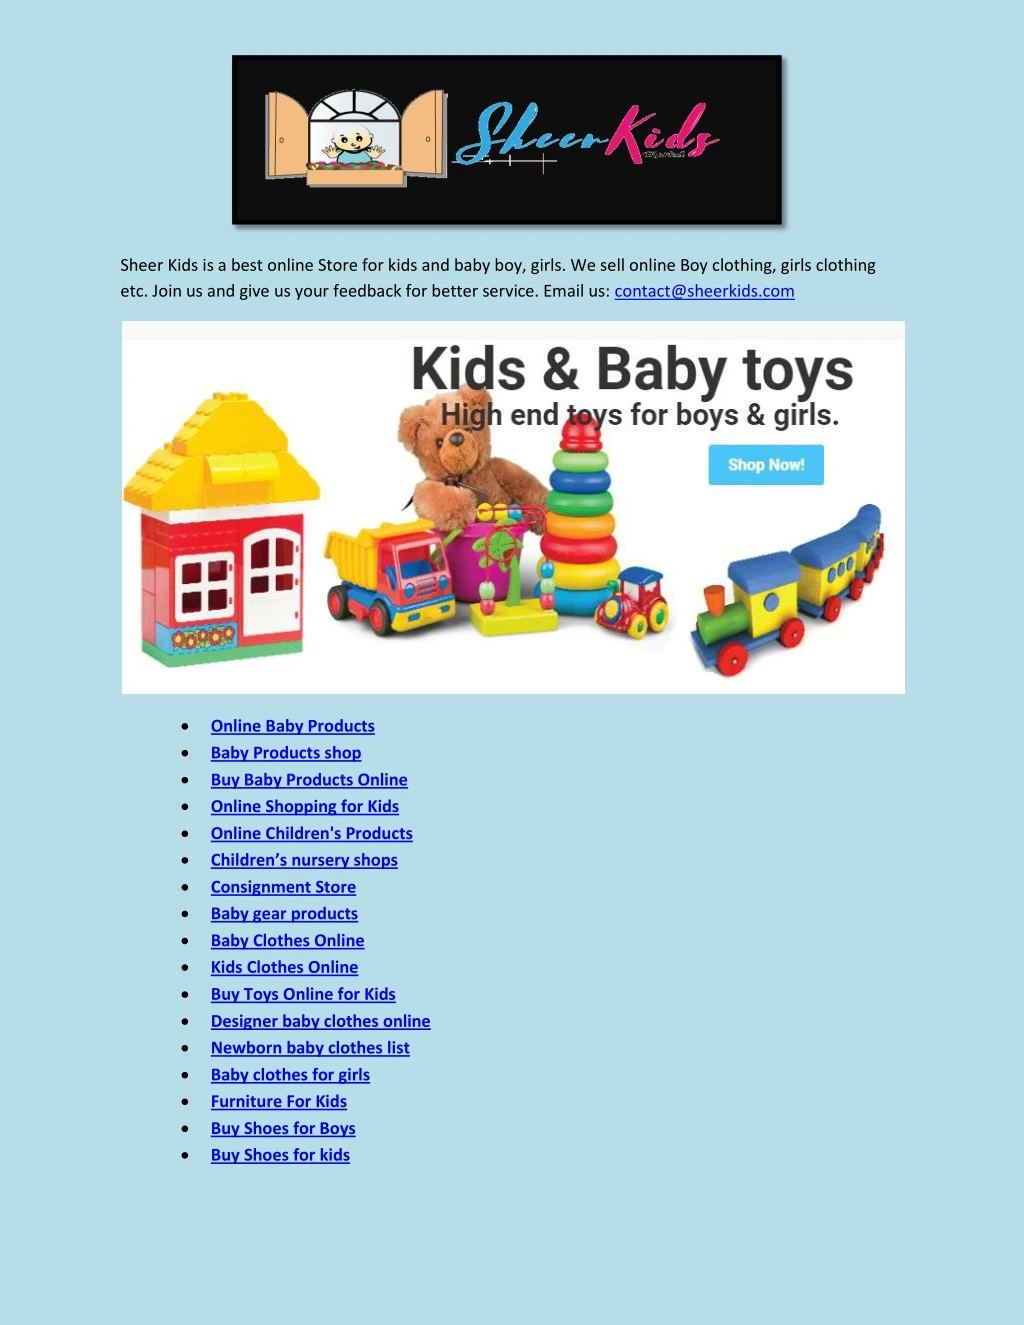 sheer kids is a best online store for kids